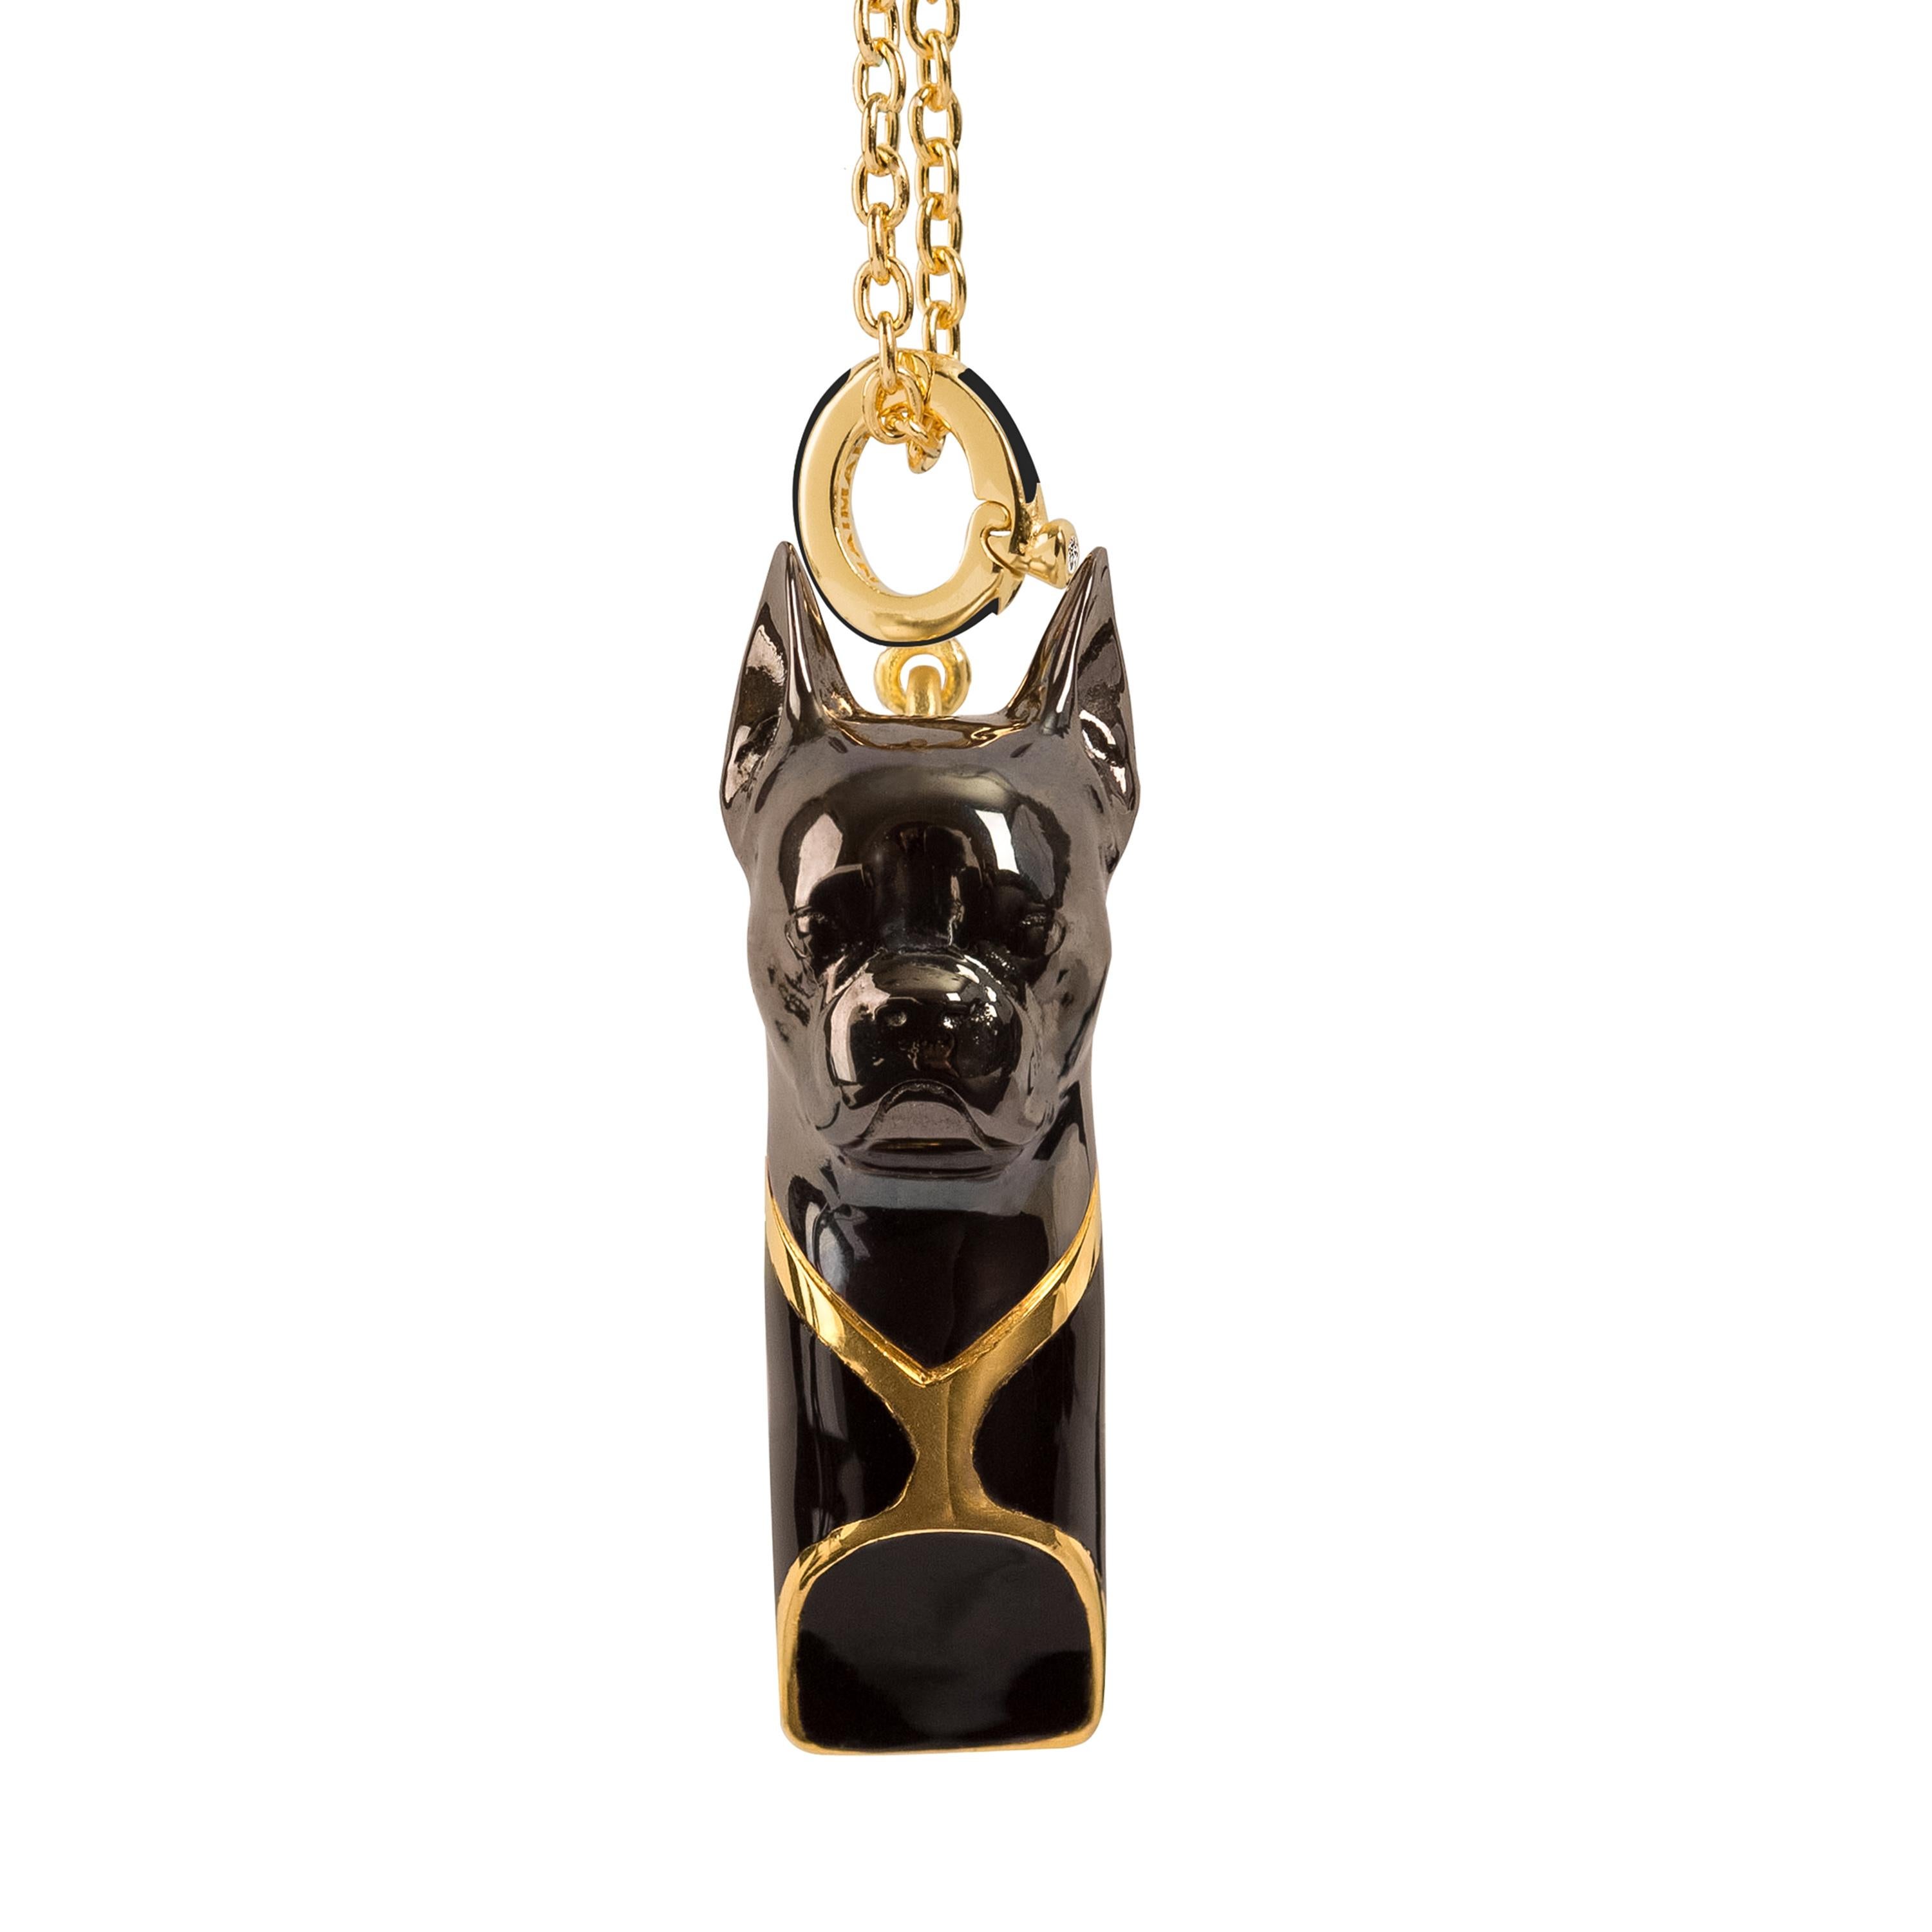 18k gold plated sterling silver dog whistle necklace charm pendant featuring a French bulldog. Black Enamel.
Inspired form Georges Hilbert's famous French Bulldog sculpture; this bat-eared but oddly beautiful, Frenchie necklace has a unique